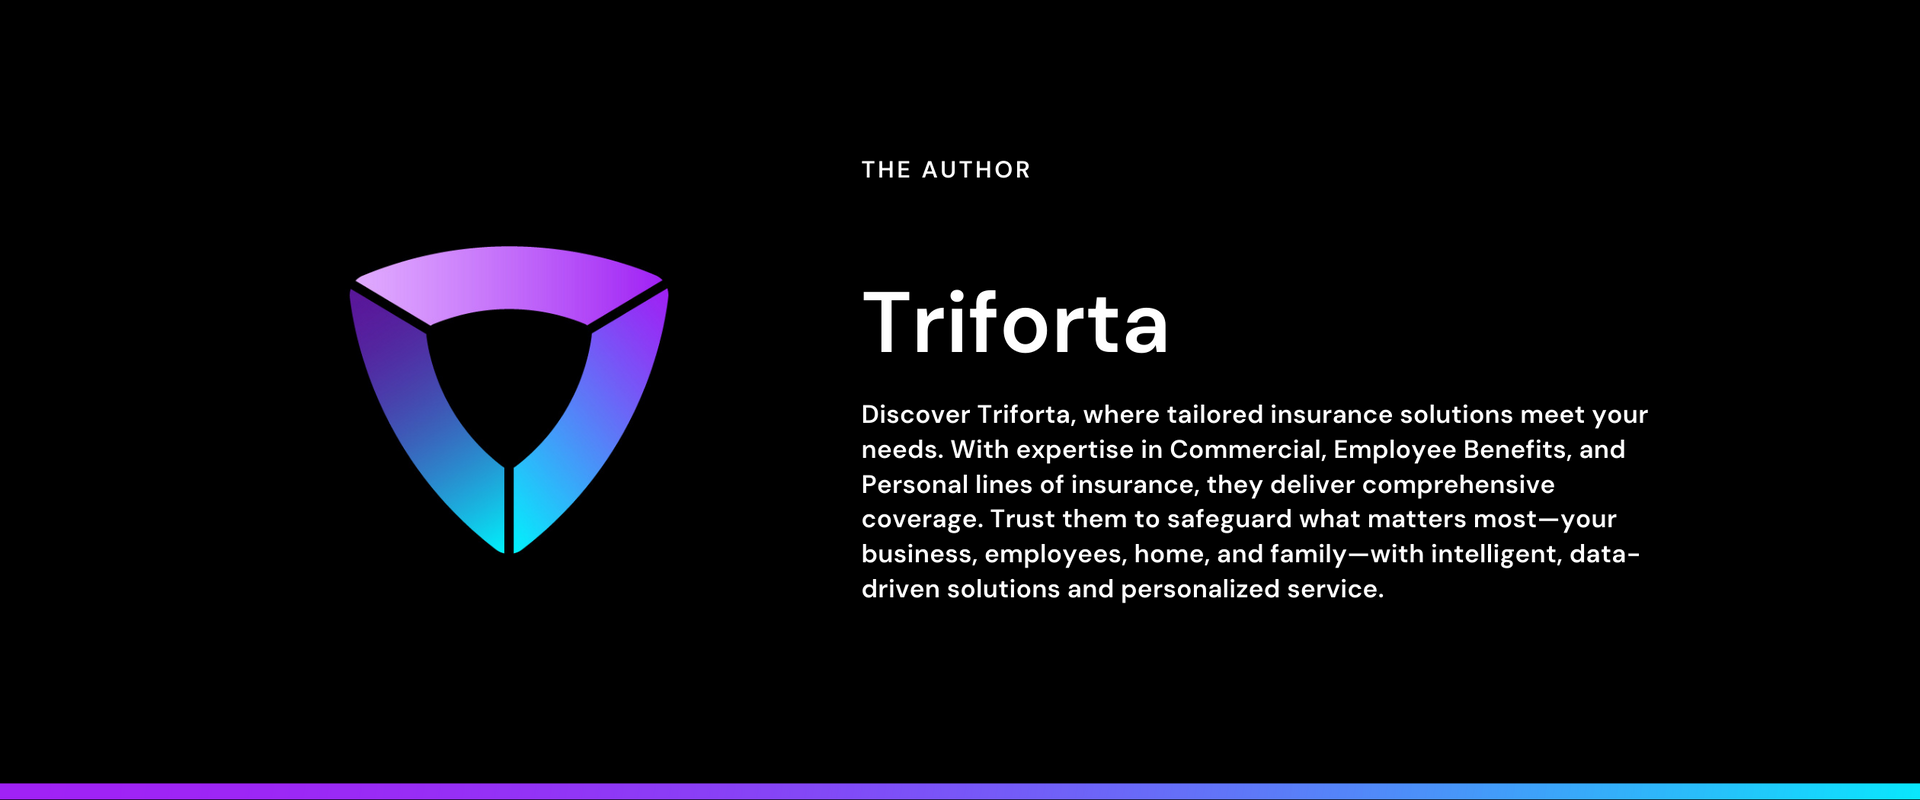 About the author: Discover Triforta, where tailored insurance solutions meet your needs.